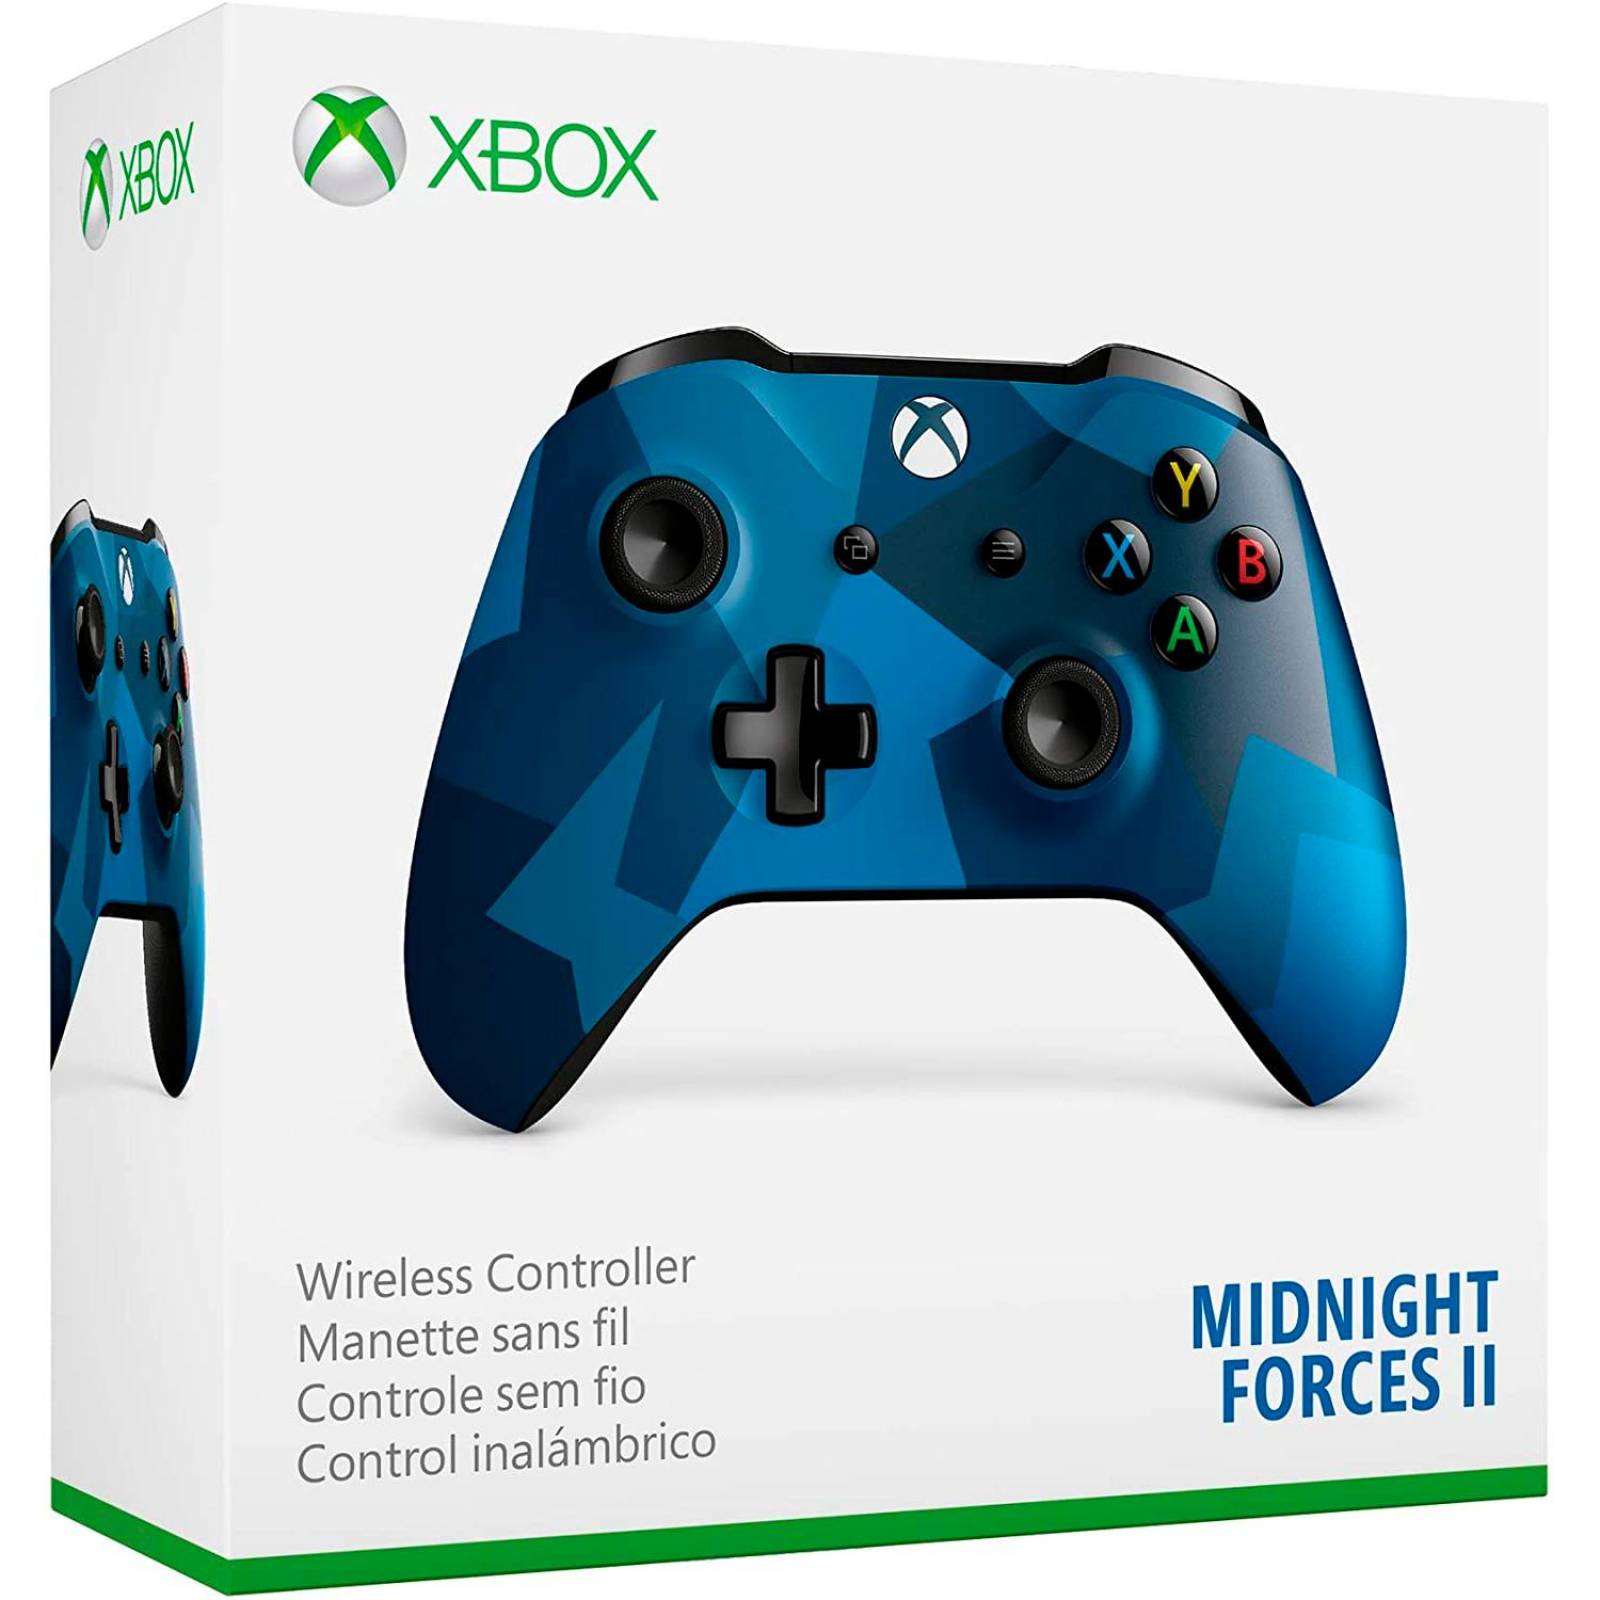 Control Inalambrico XBOX One S Midnight Forces II 